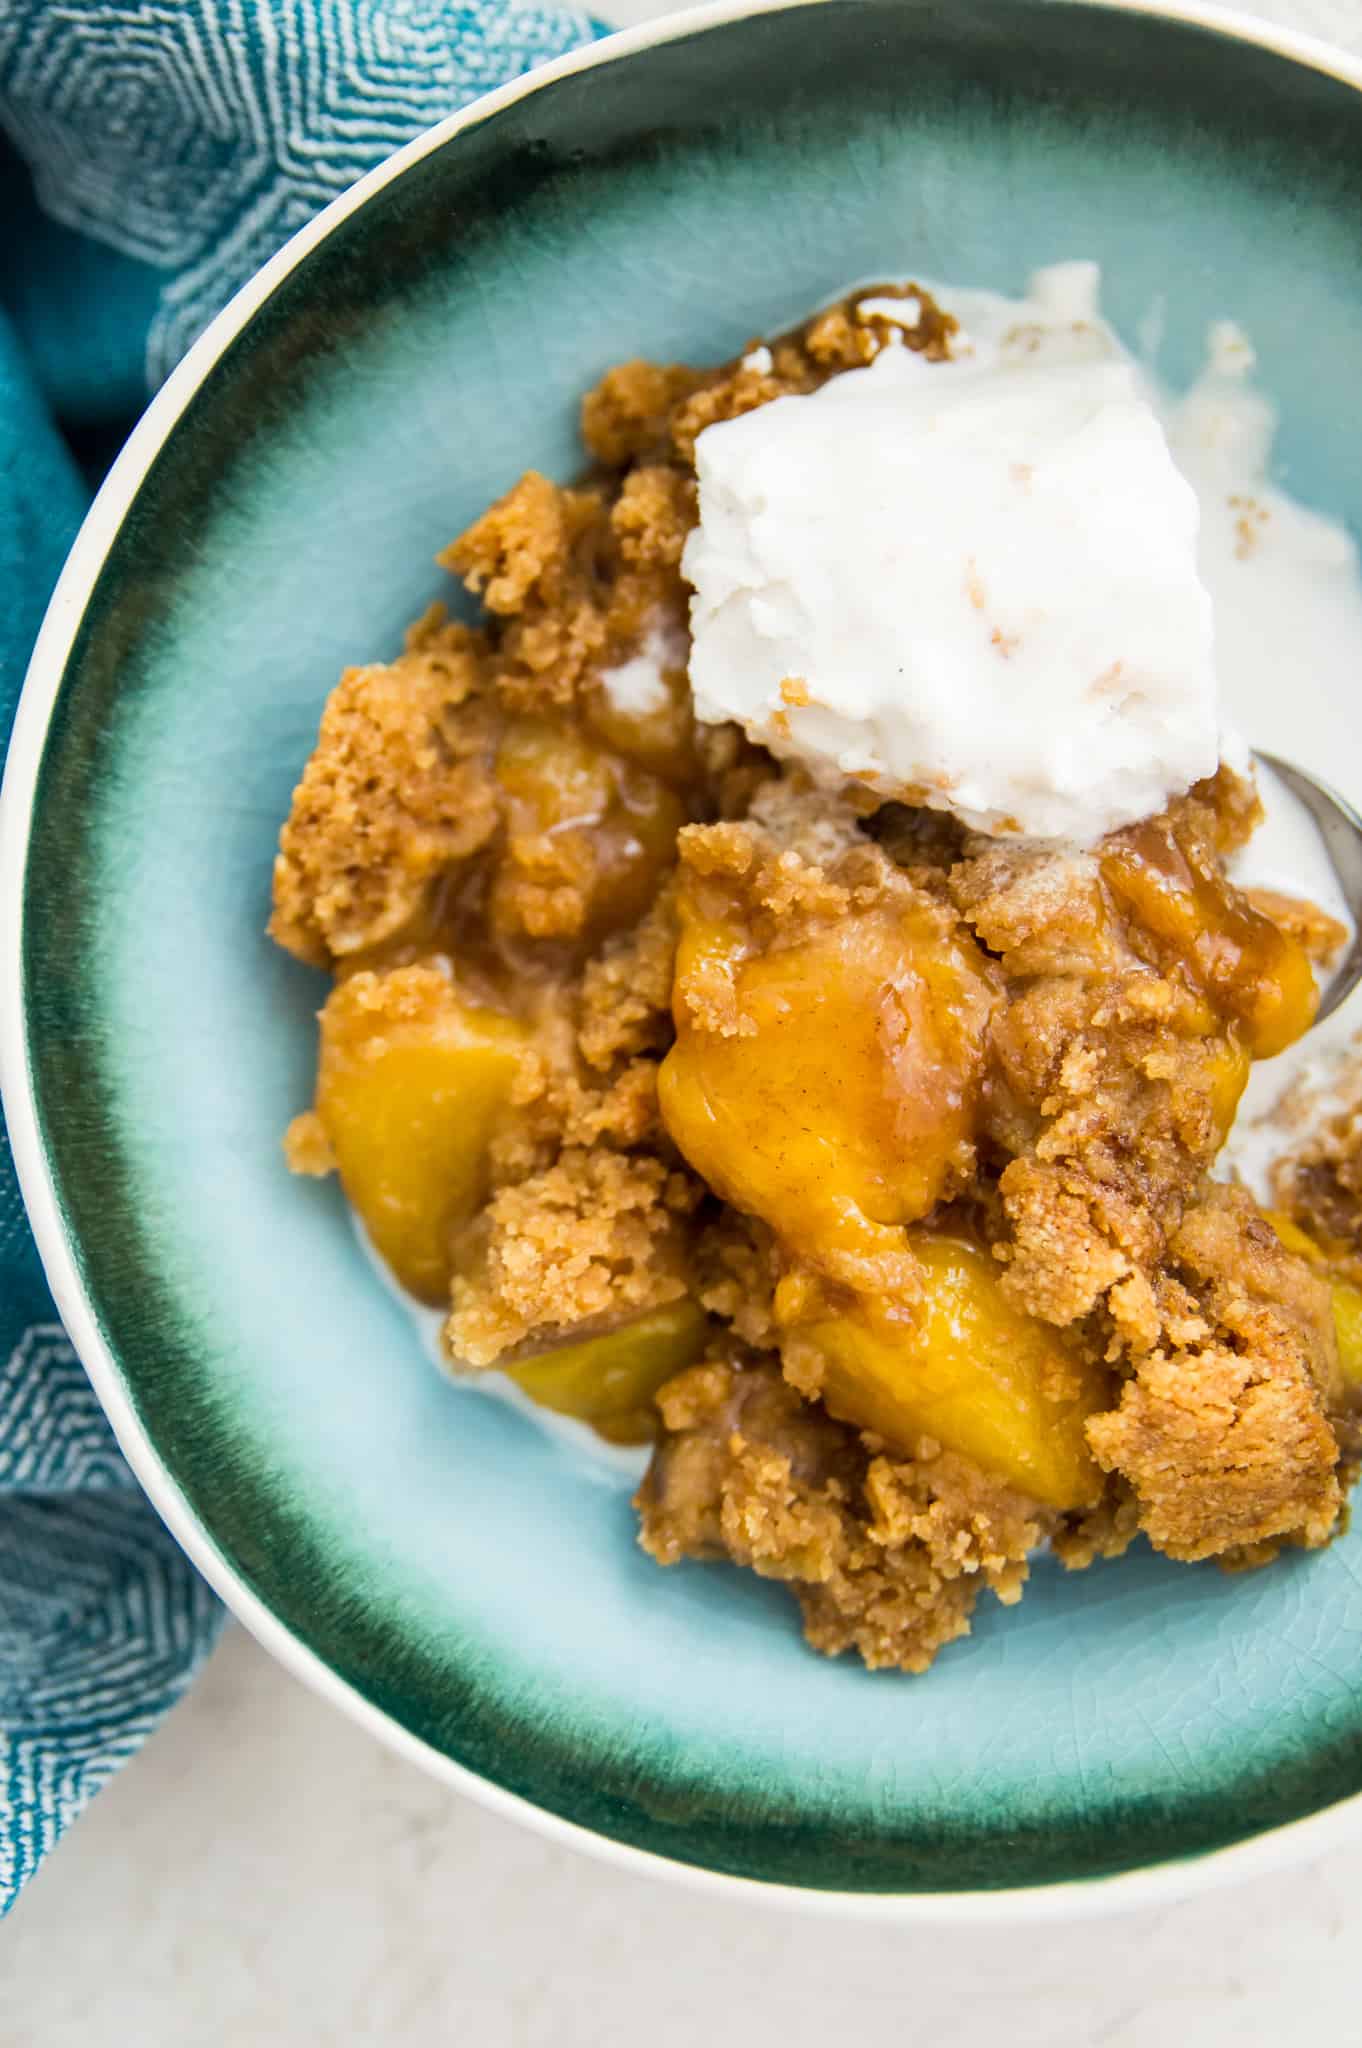 A bowl of peach cobbler with a scoop of vanilla ice cream on top.